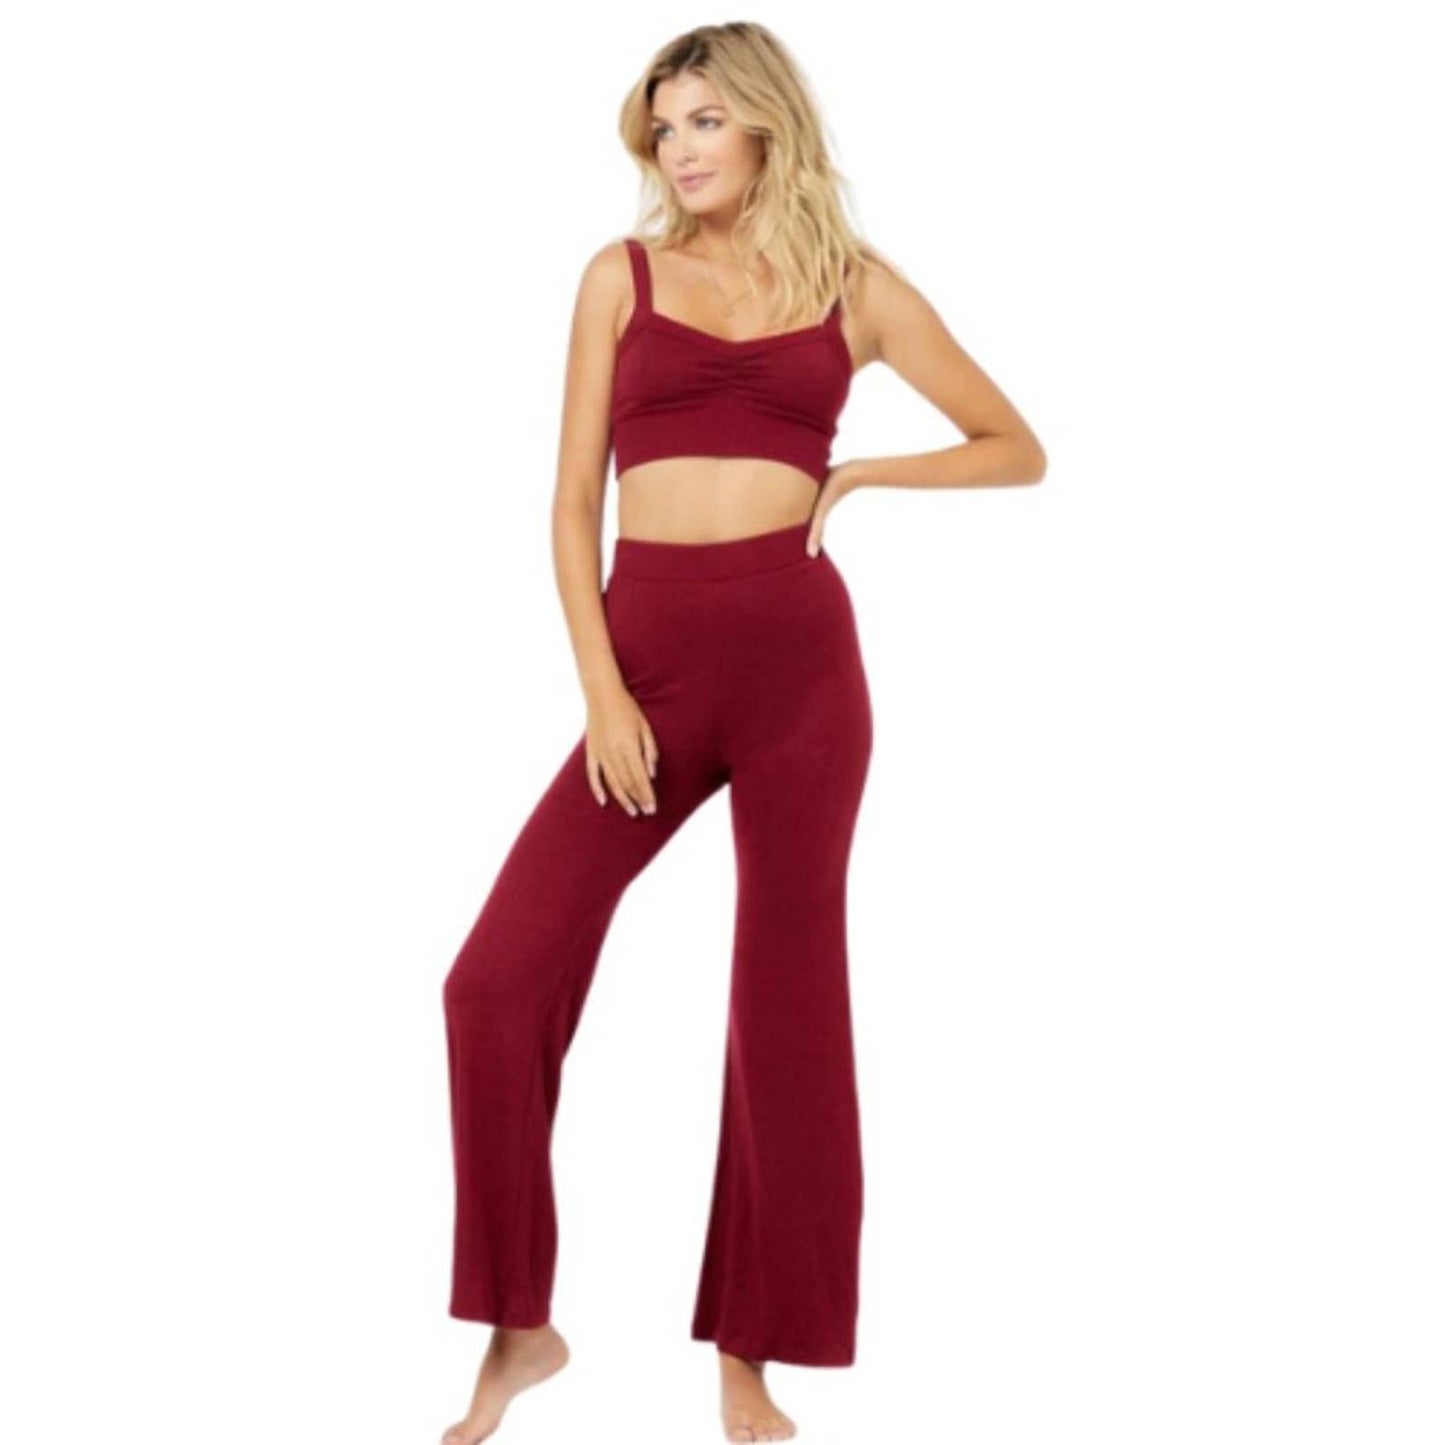 L*SPACE Cabernet Rosie Top & Cabernet Adelyn Pant NWT 2 Piece Set Size Small